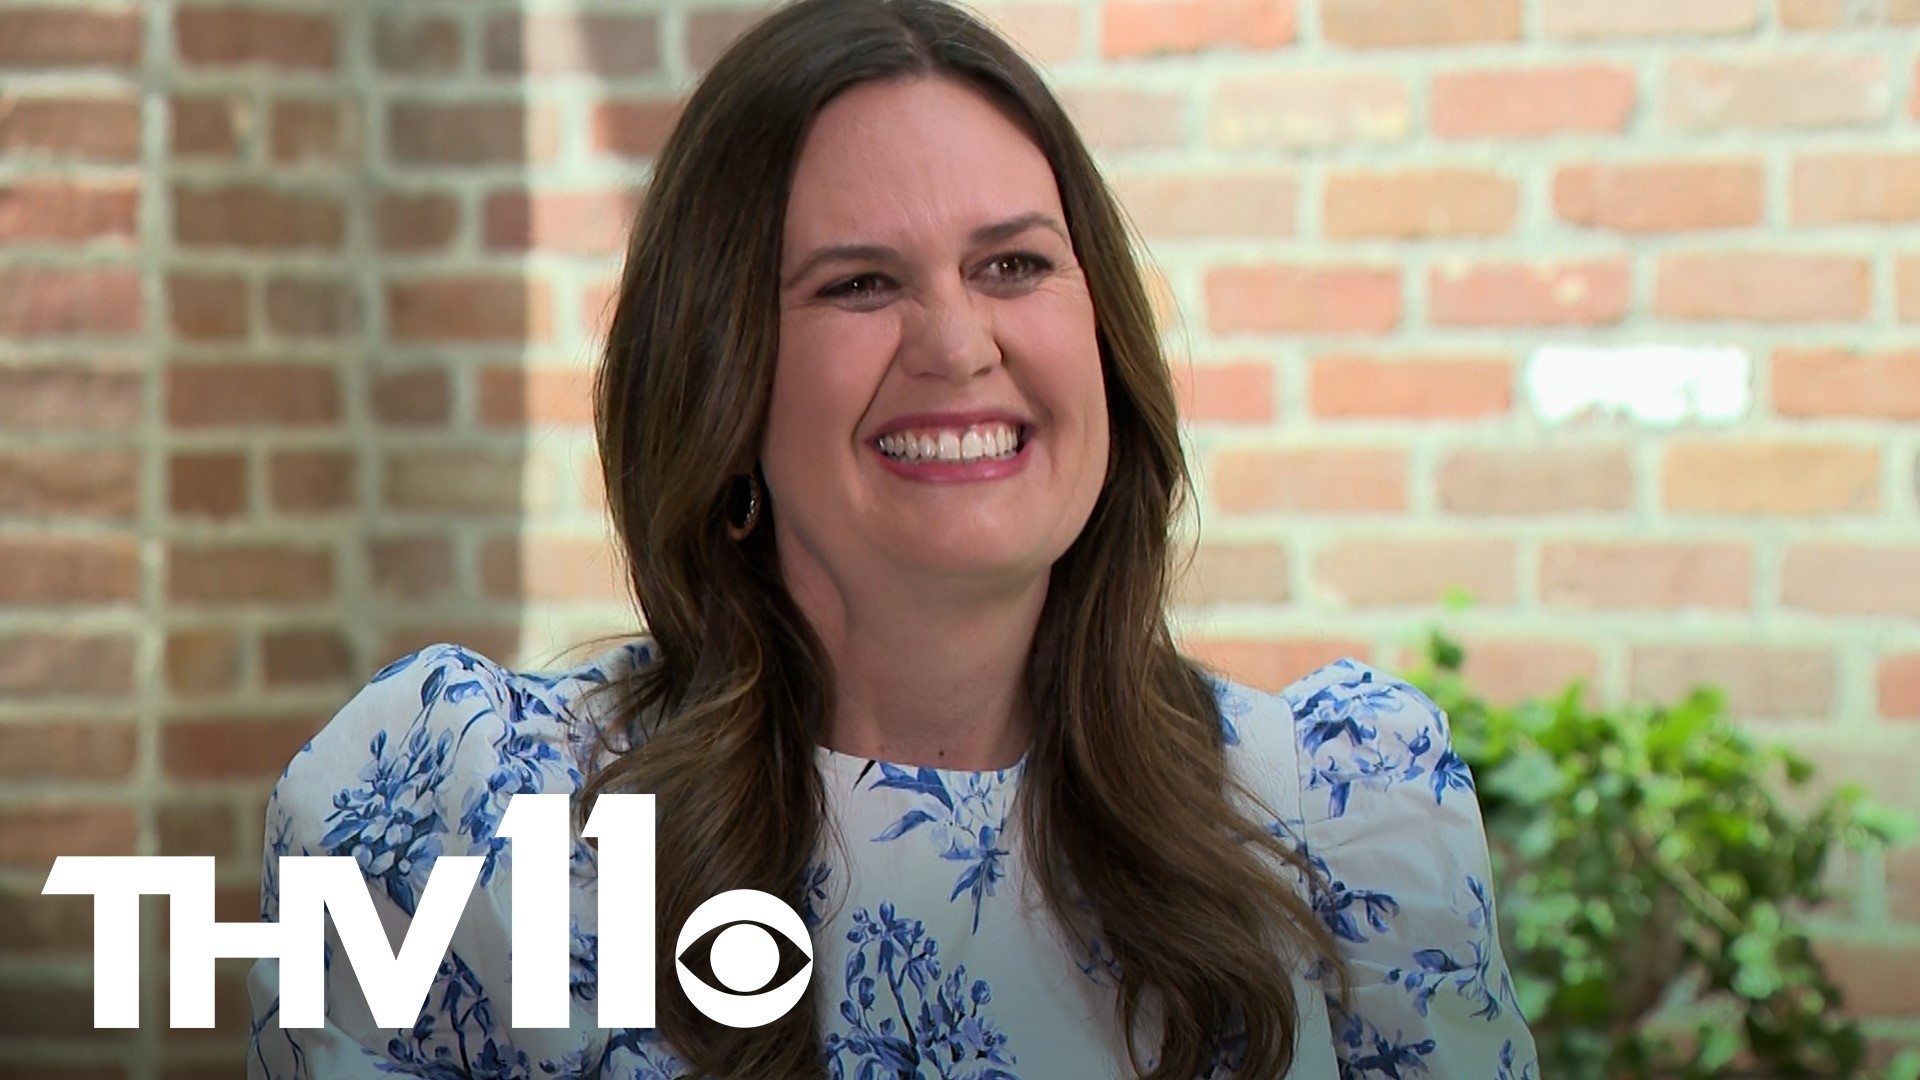 Gov. Sarah Huckabee Sanders sat down with Craig O'Neill to discuss her first 100 days including the LEARNS Act and criticisms against her administration.